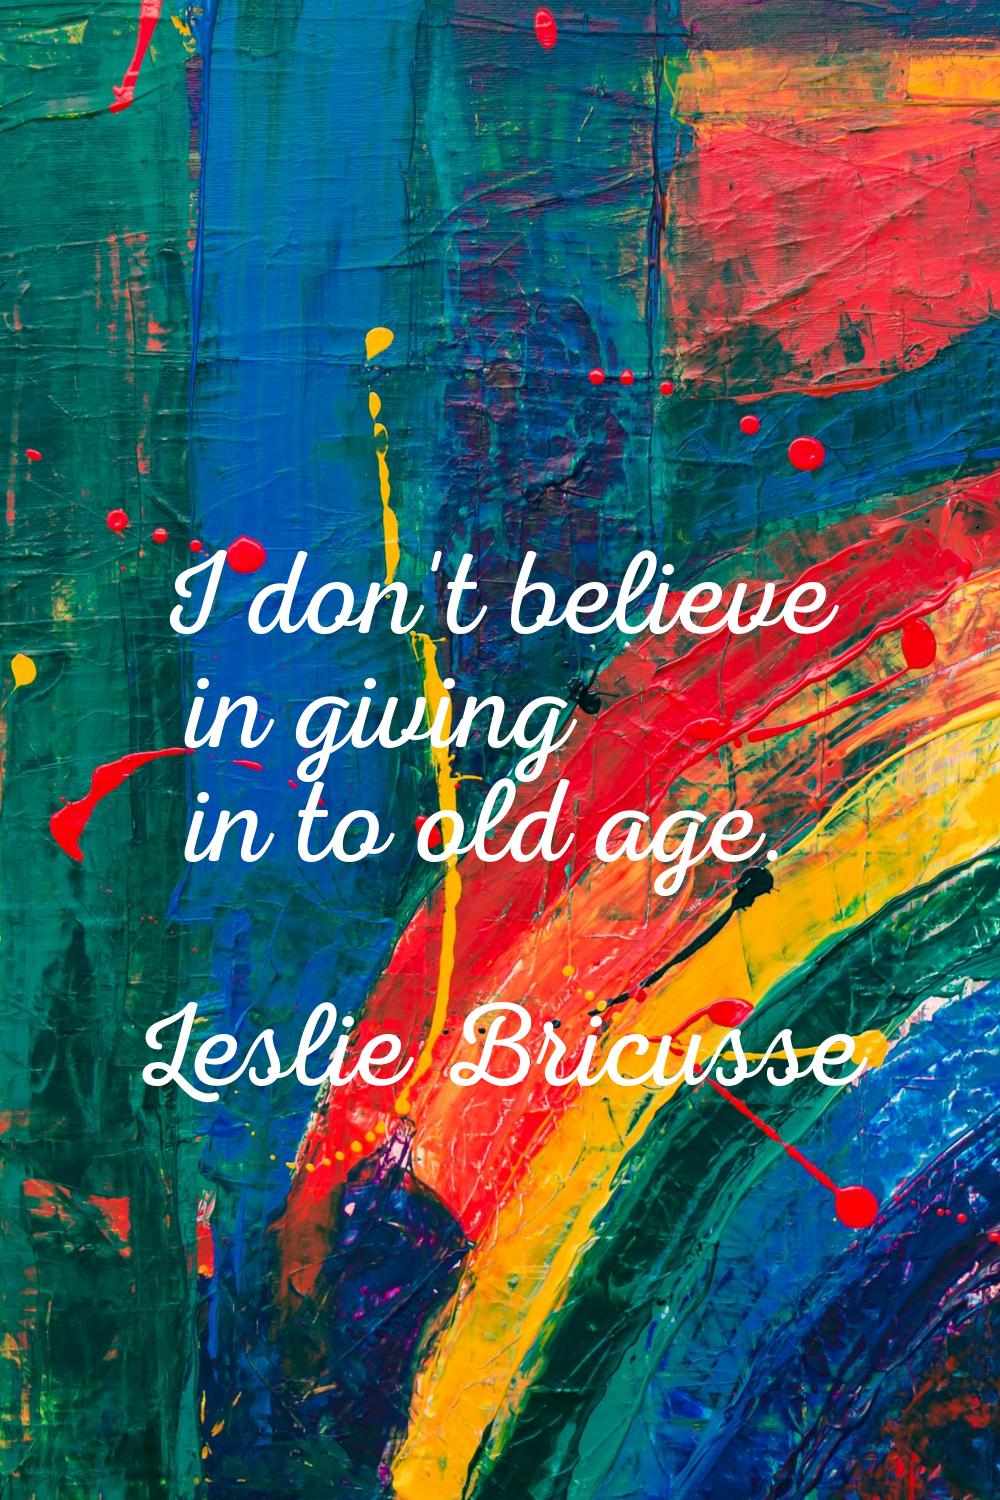 I don't believe in giving in to old age.